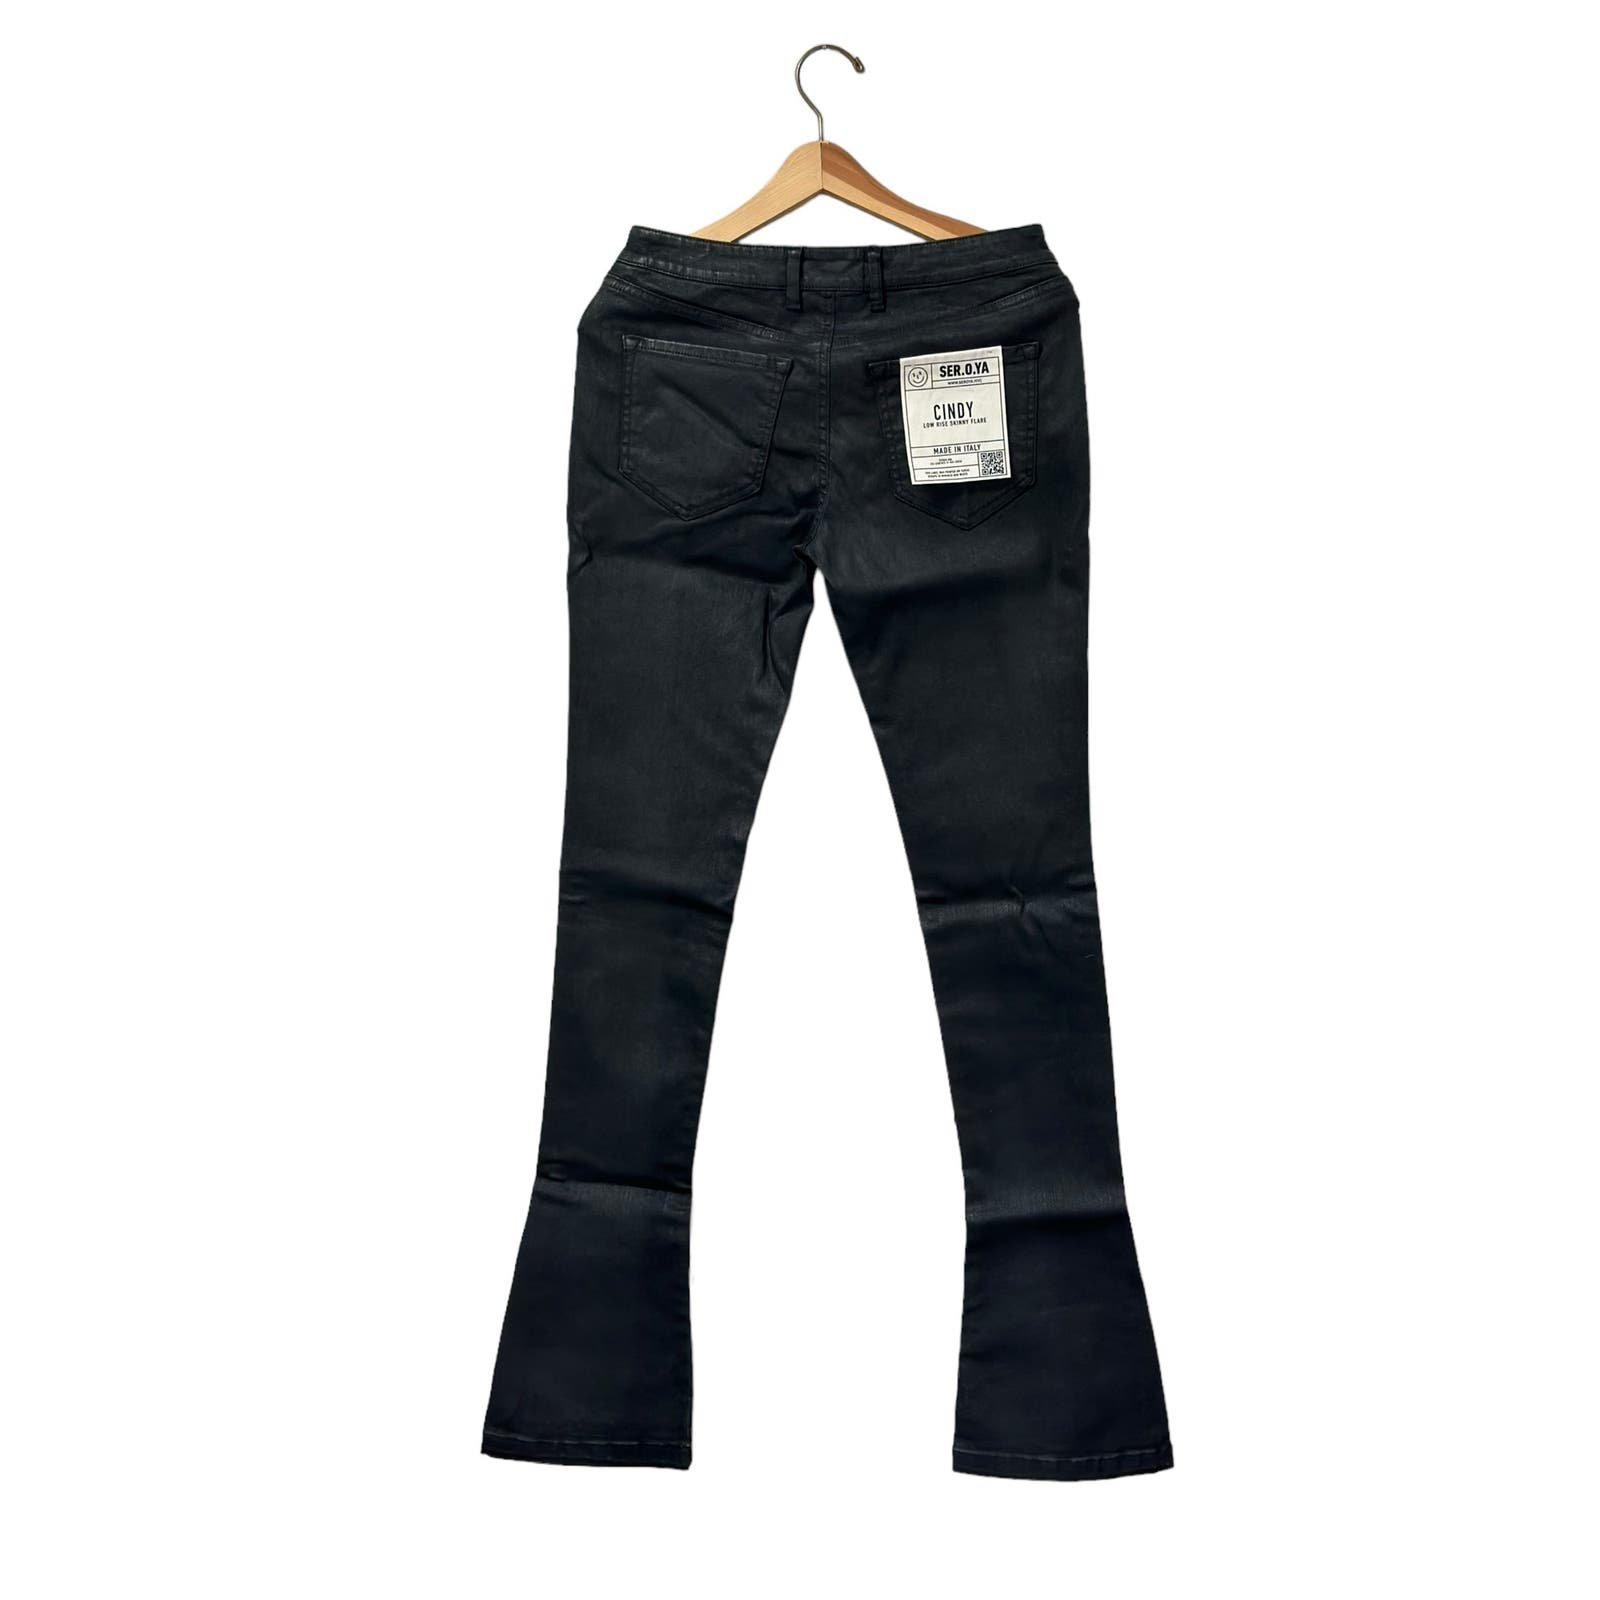 Special offer  NWT Ser.O.Ya Cindy Low Rise Flare Jeans in Waxed Black MSRP $ 295 LmDa9ii2j Online Shop